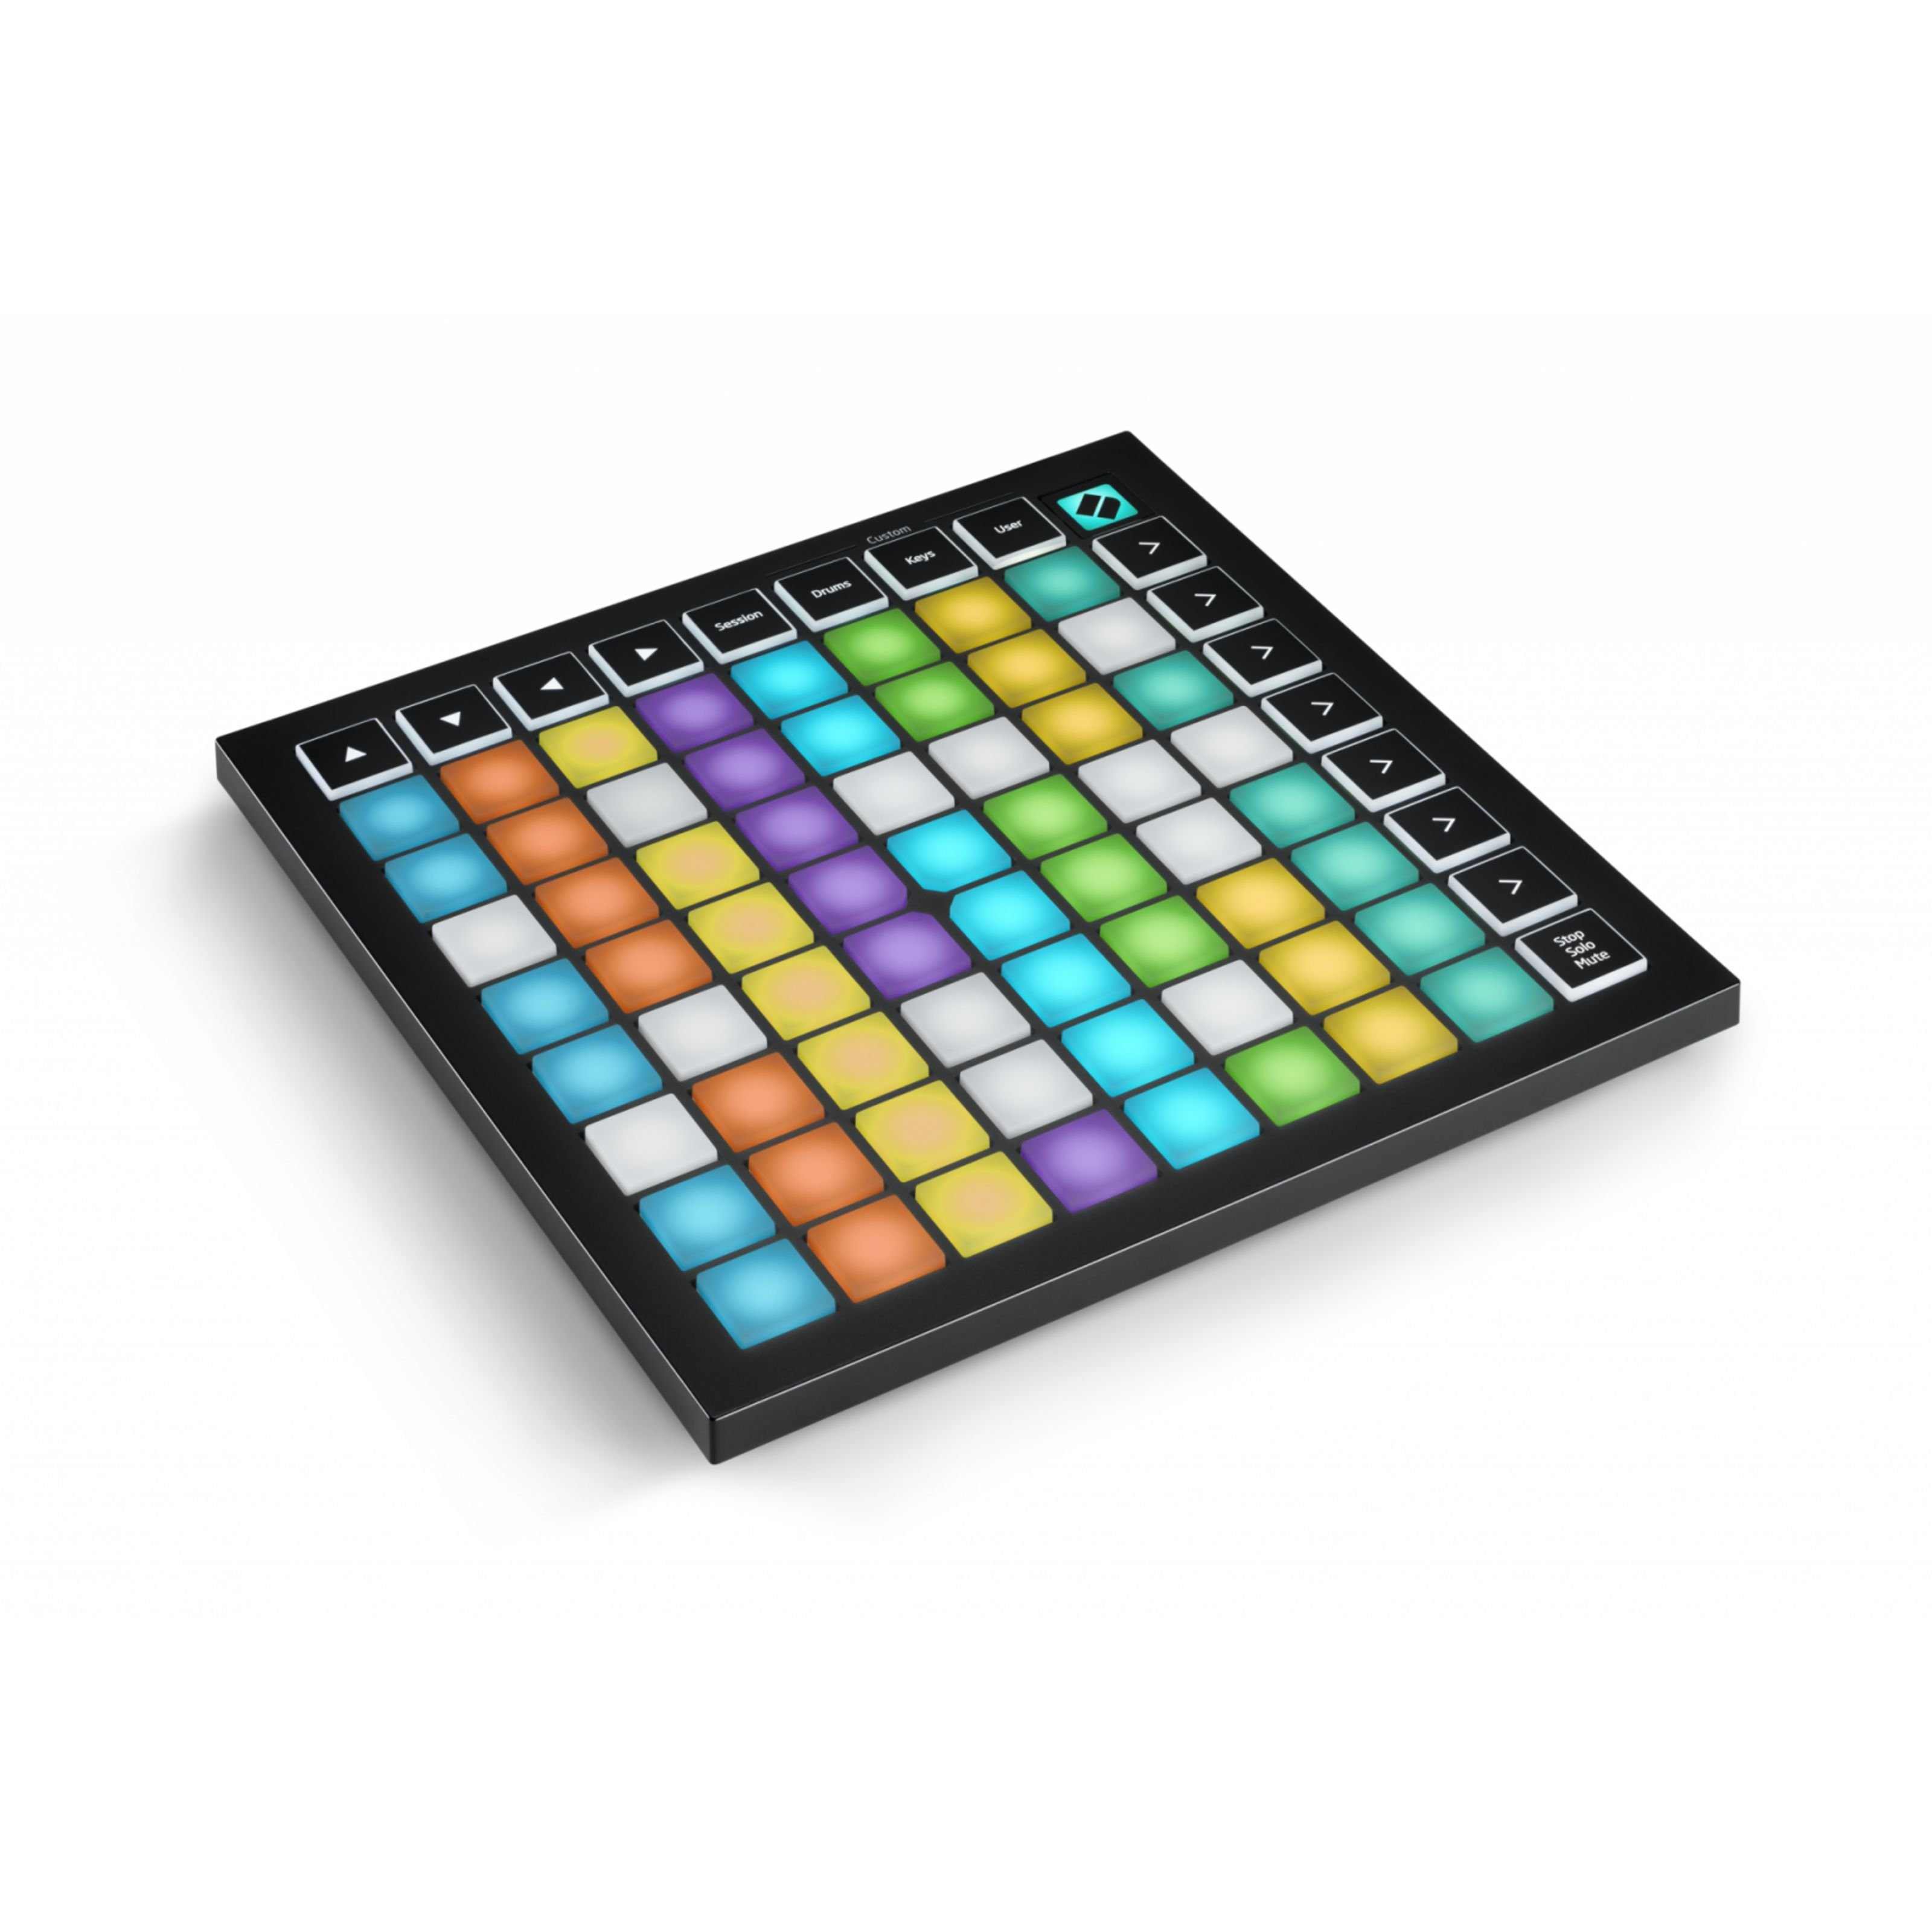 Novation Mischpult, (Launchpad Mini MK3 Grid-Instrument f. AbletonLive, Hardware Controller, DAW Controller), Launchpad Mini MK3 - DAW Controller